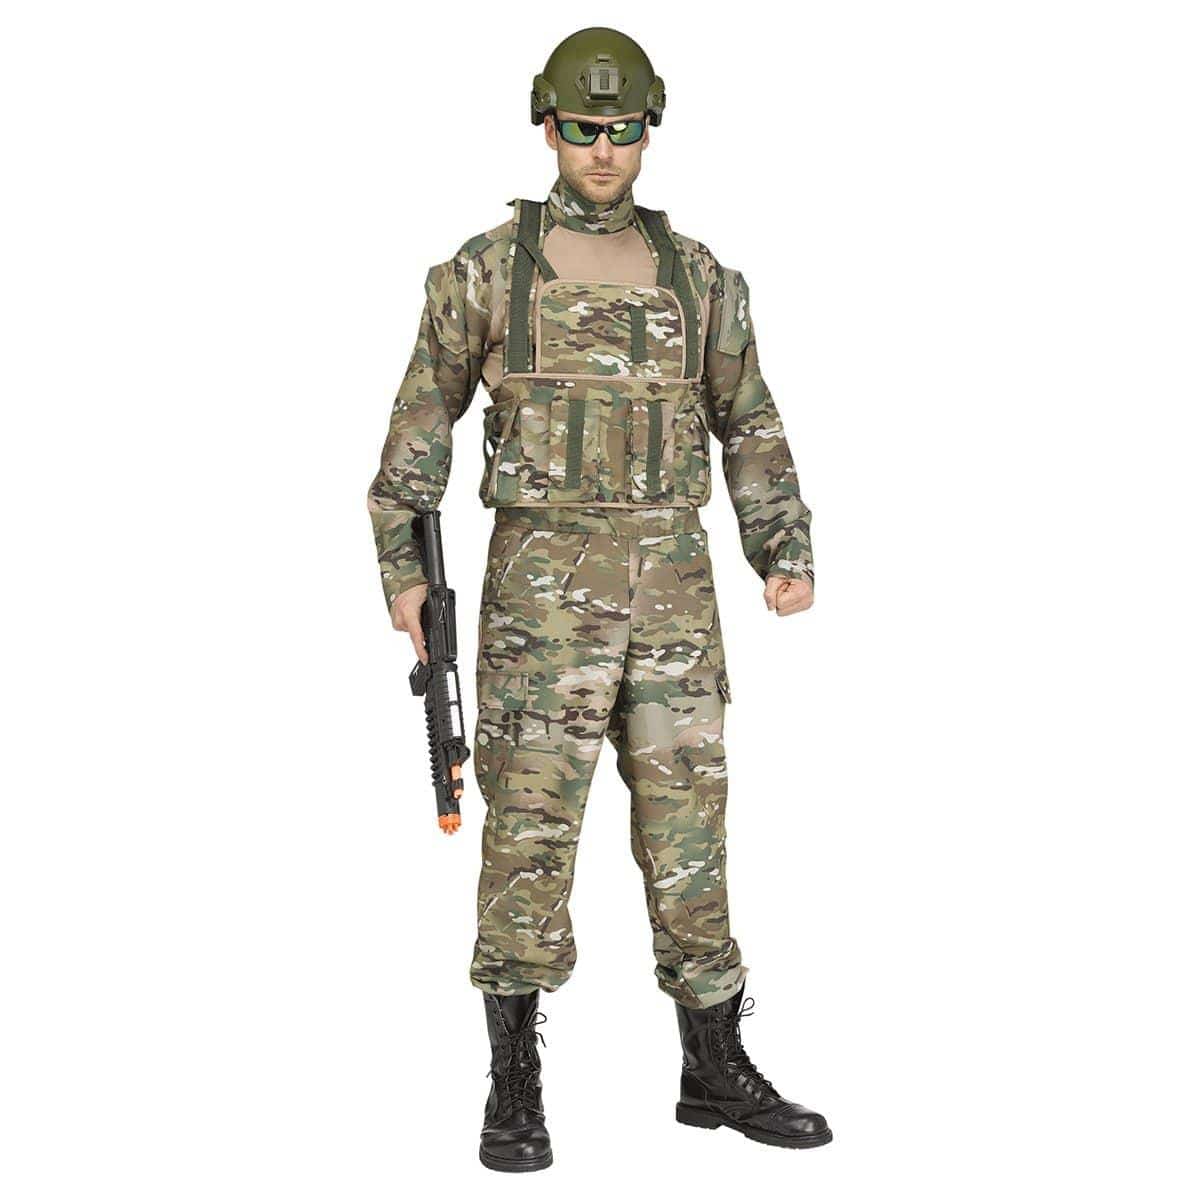 FUN WORLD Costumes Tactical Assault Commando Costume for Adults 071765105545